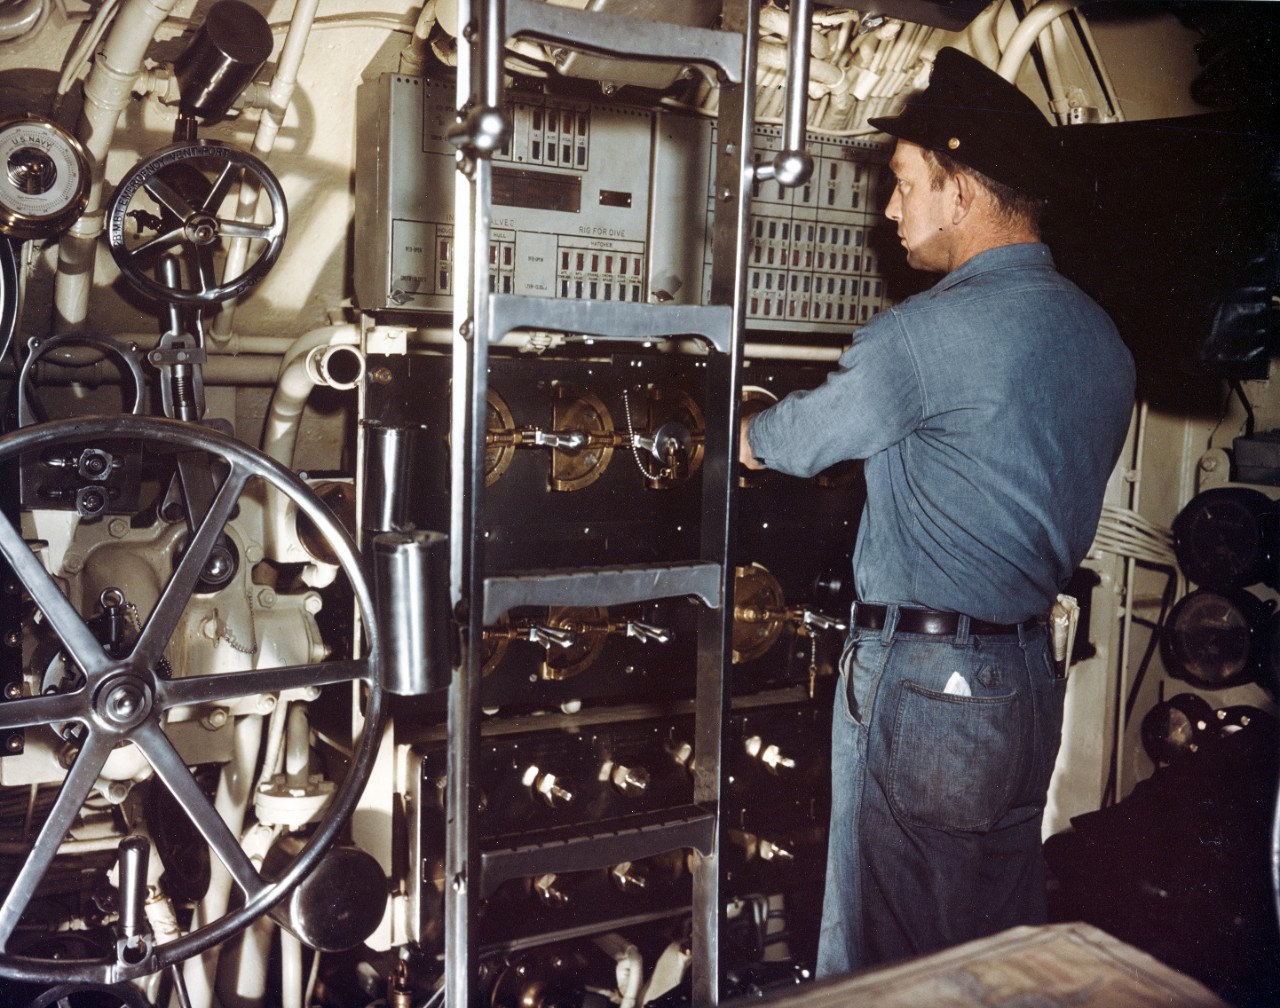 Submarine Control Station manned by a Chief Petty Officer, during World War II